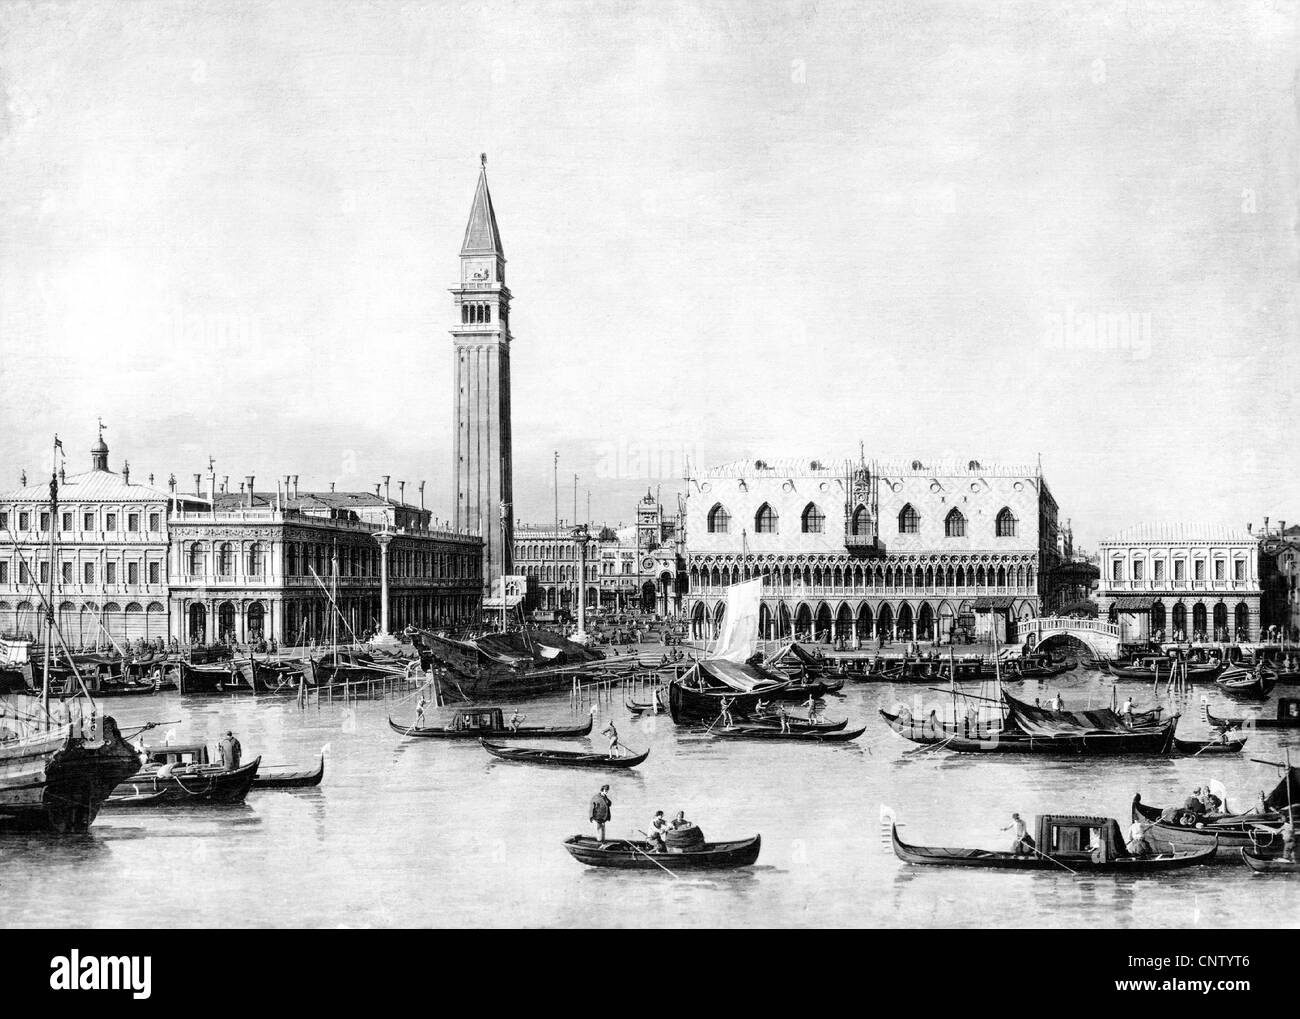 geography / travel, Italy, Venice, Piazetta, after painting by Bernardo Bellotto (Canaletto), historic, historical, 18th century, campanile, Piazza San Marco, St Mark's Square, Veneto, Venetia, Southern Europe, metropolis, gondola, gondolas, traffic volume, Canale Grande, people, Additional-Rights-Clearences-Not Available Stock Photo